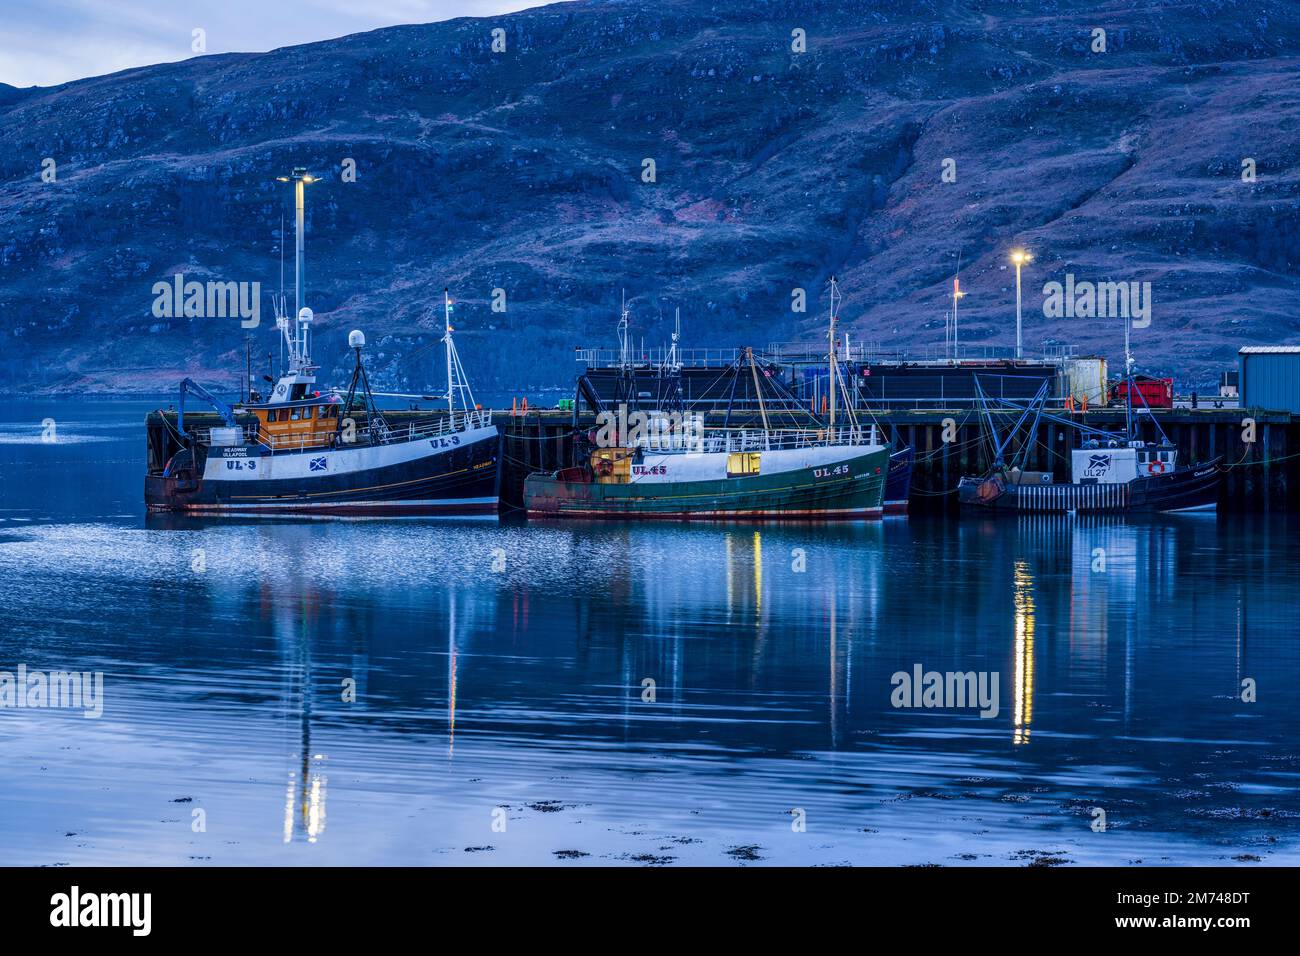 Fishing boats moored in Ullapool harbour at daybreak - Ullapool, Wester Ross, Highland, Scotland, UK Stock Photo